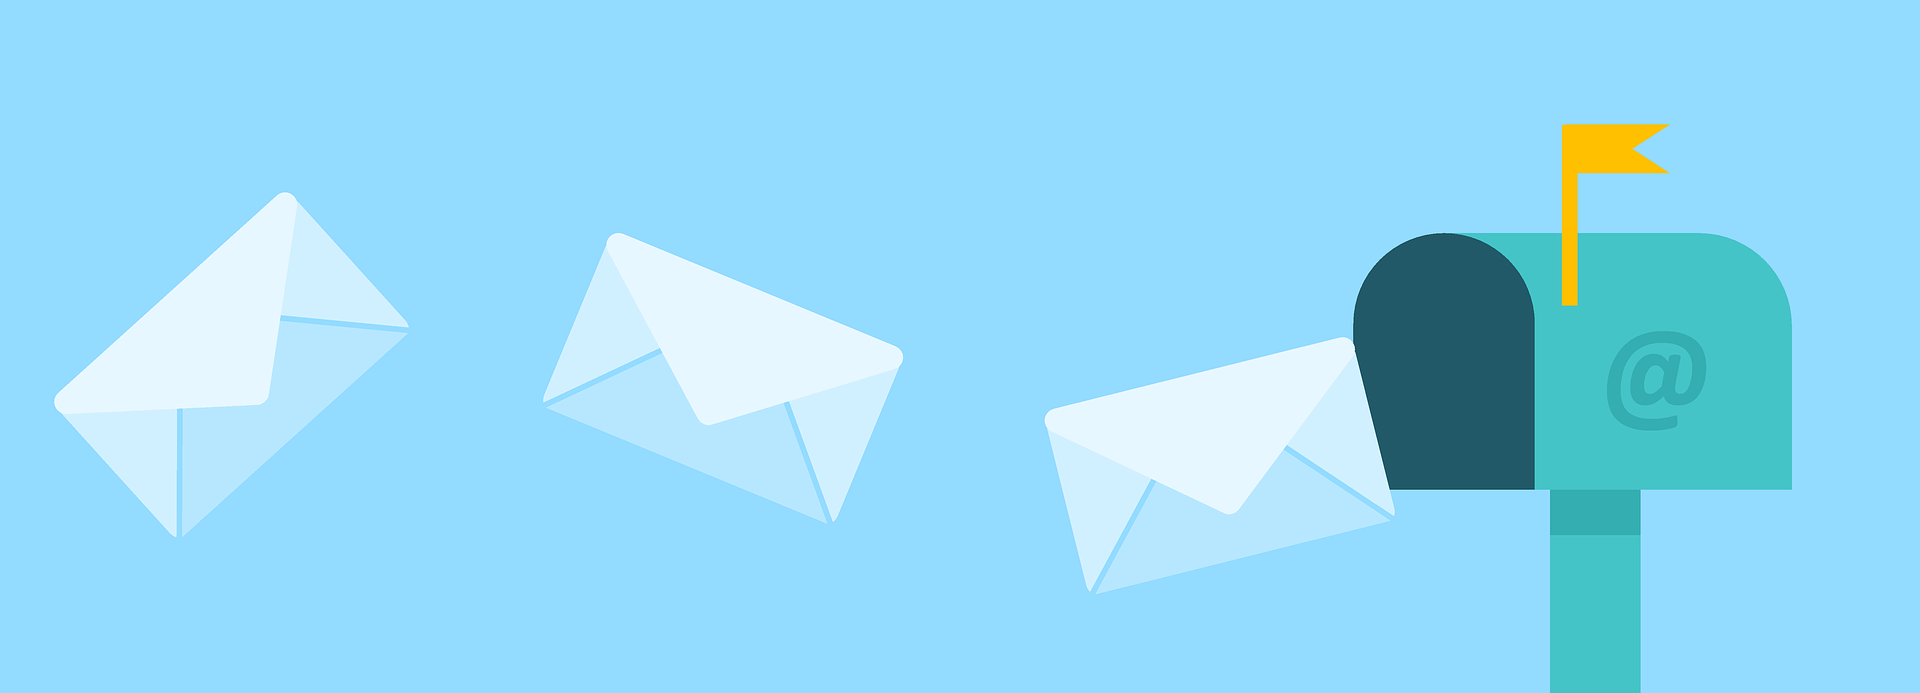 How to Keep Your Inbox At Zero? Find Out Here!